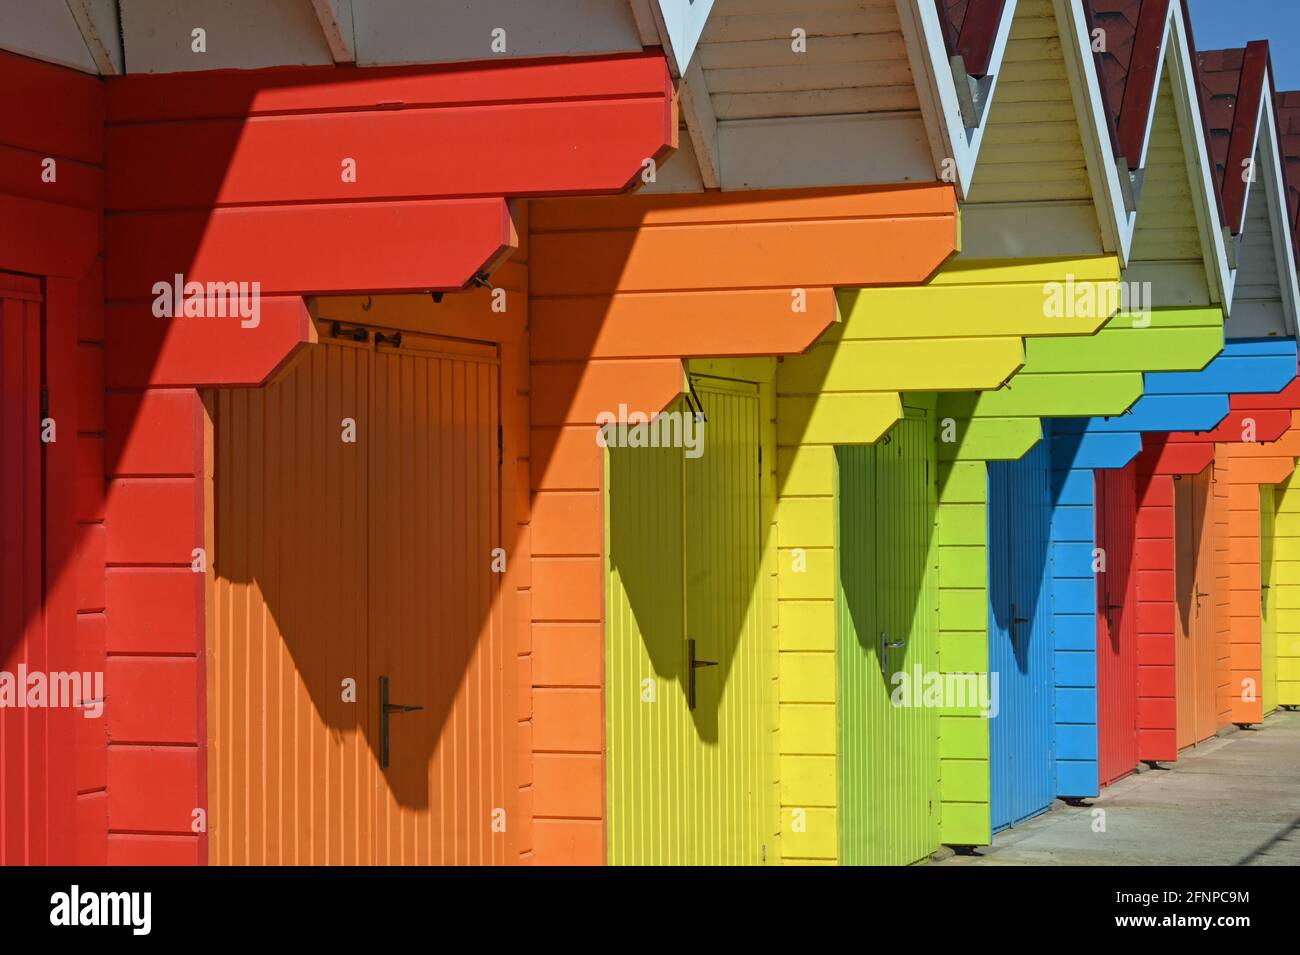 Colourful beach huts at Scarborough, Yorkshire, UK Stock Photo